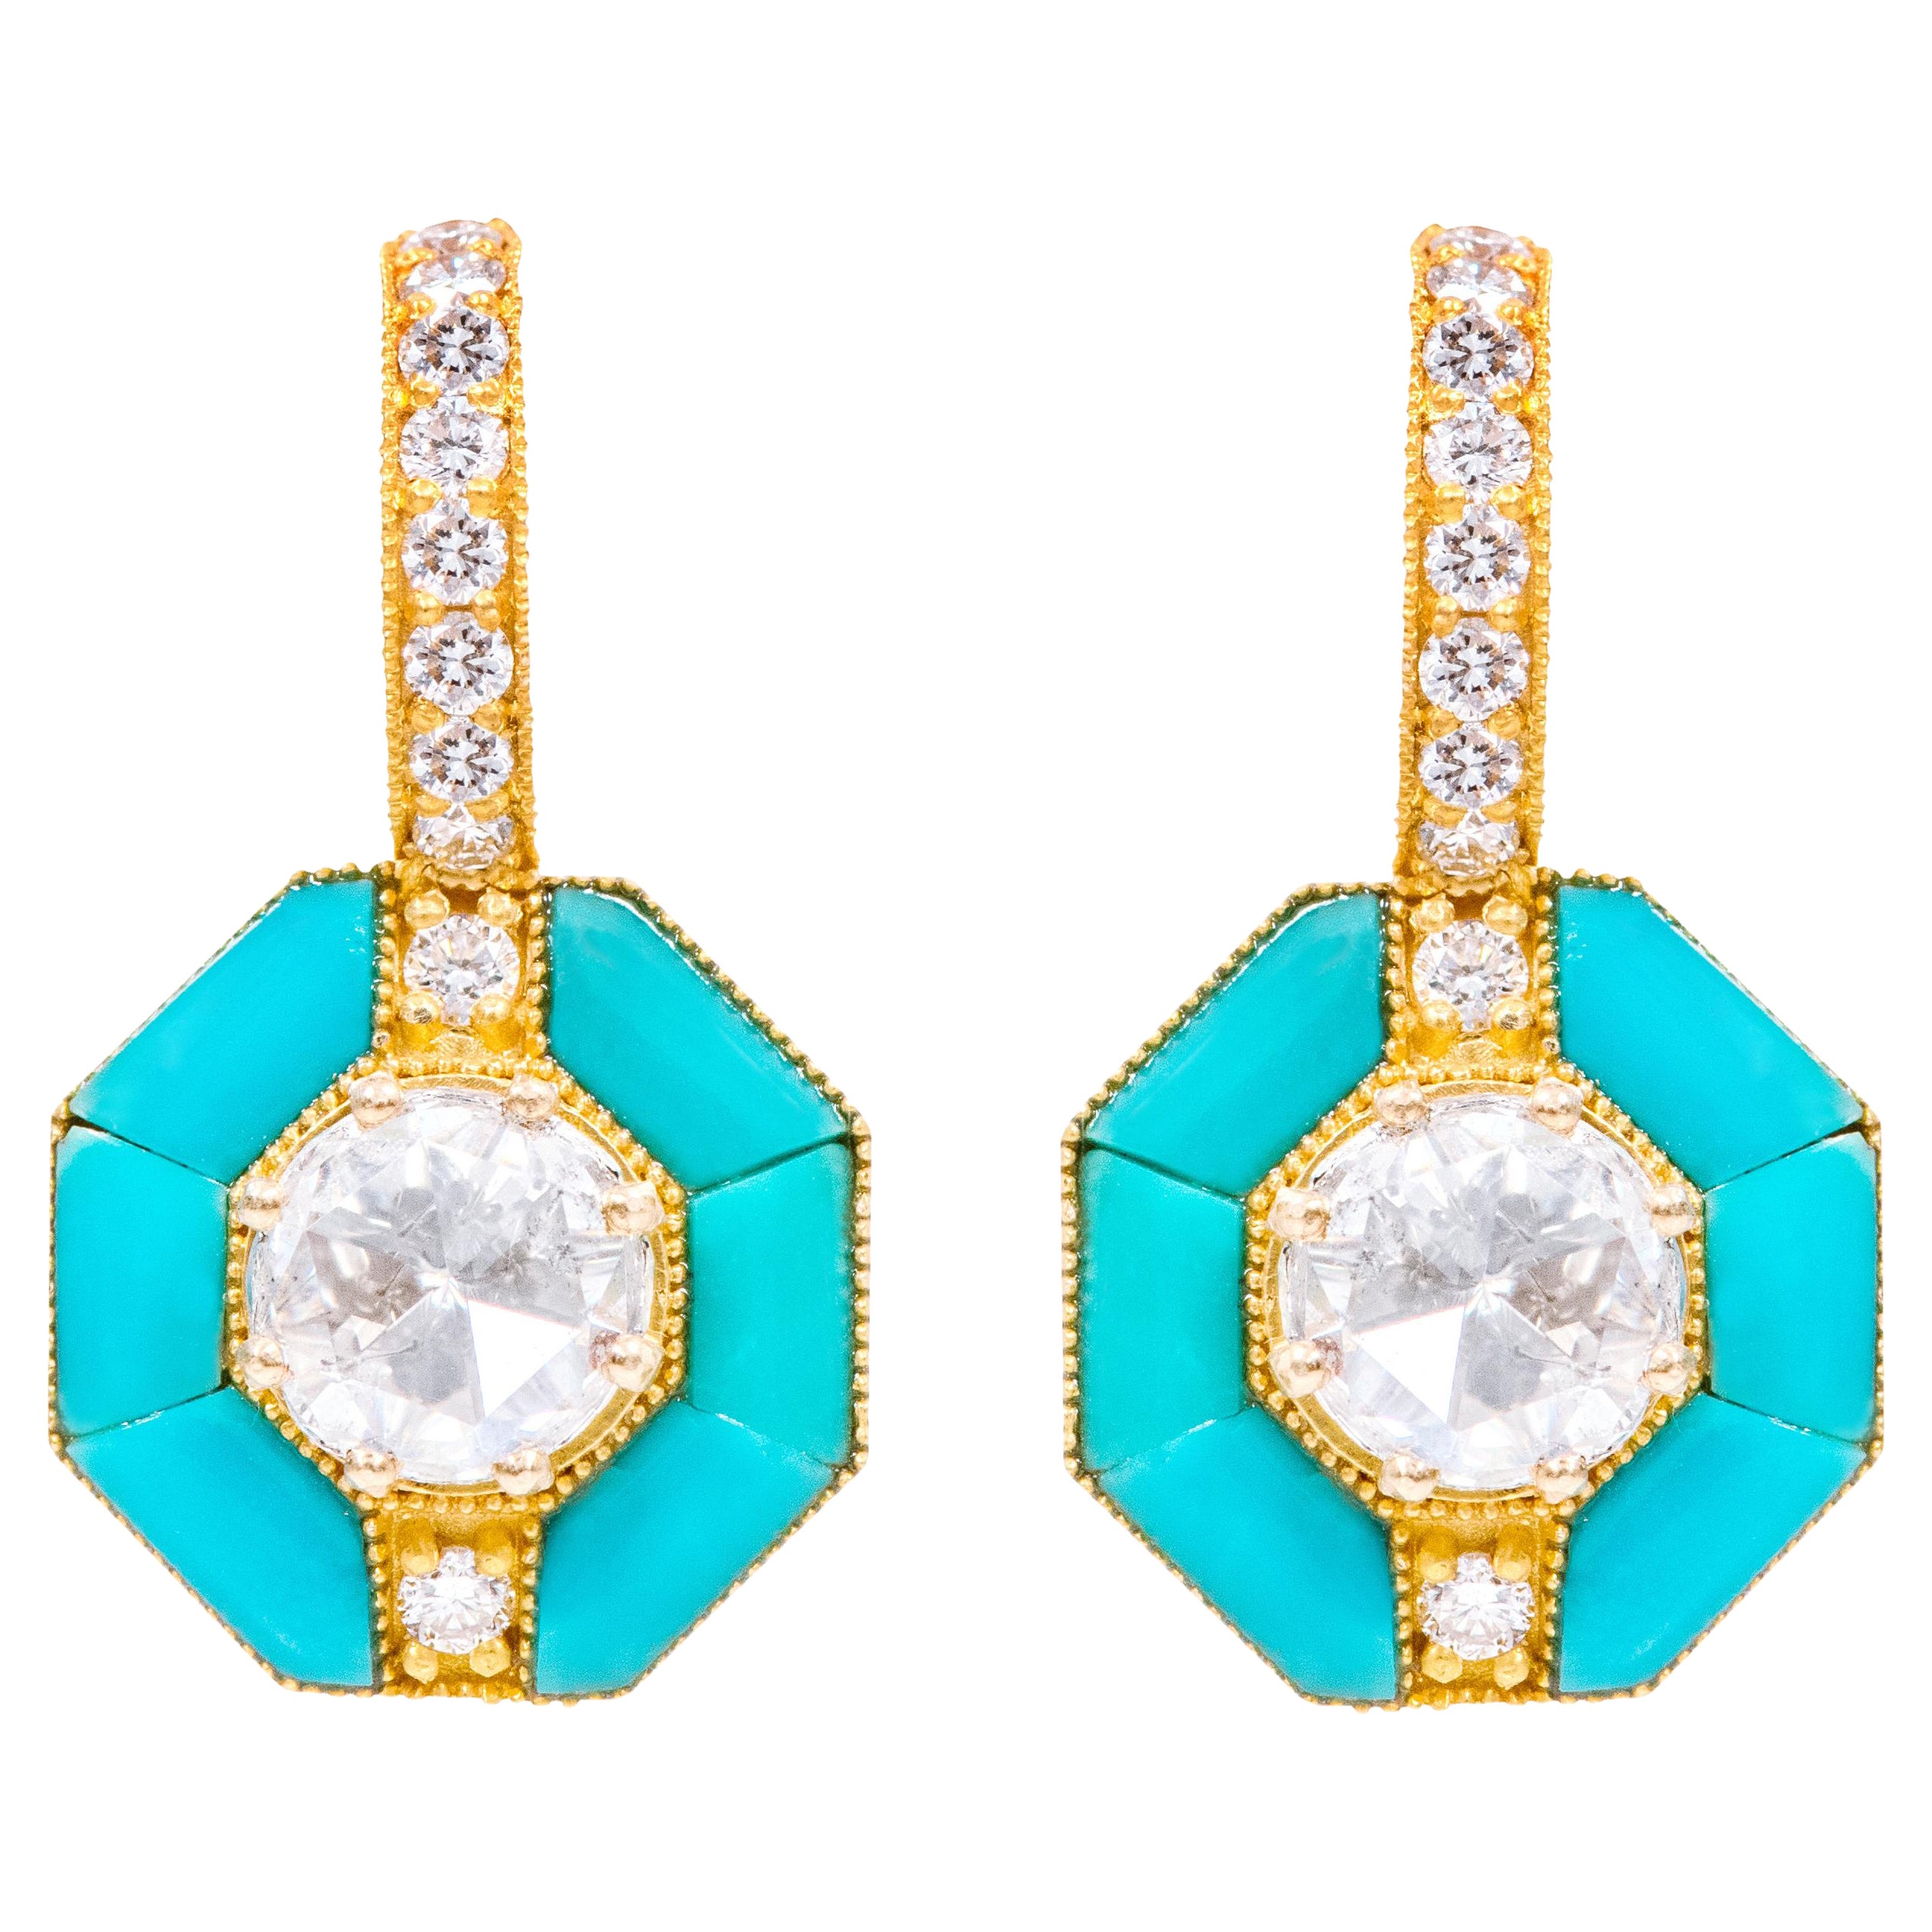 18 Karat Yellow Gold 3.55 Carat Solitaire Diamond and Turquoise Drop Earrings